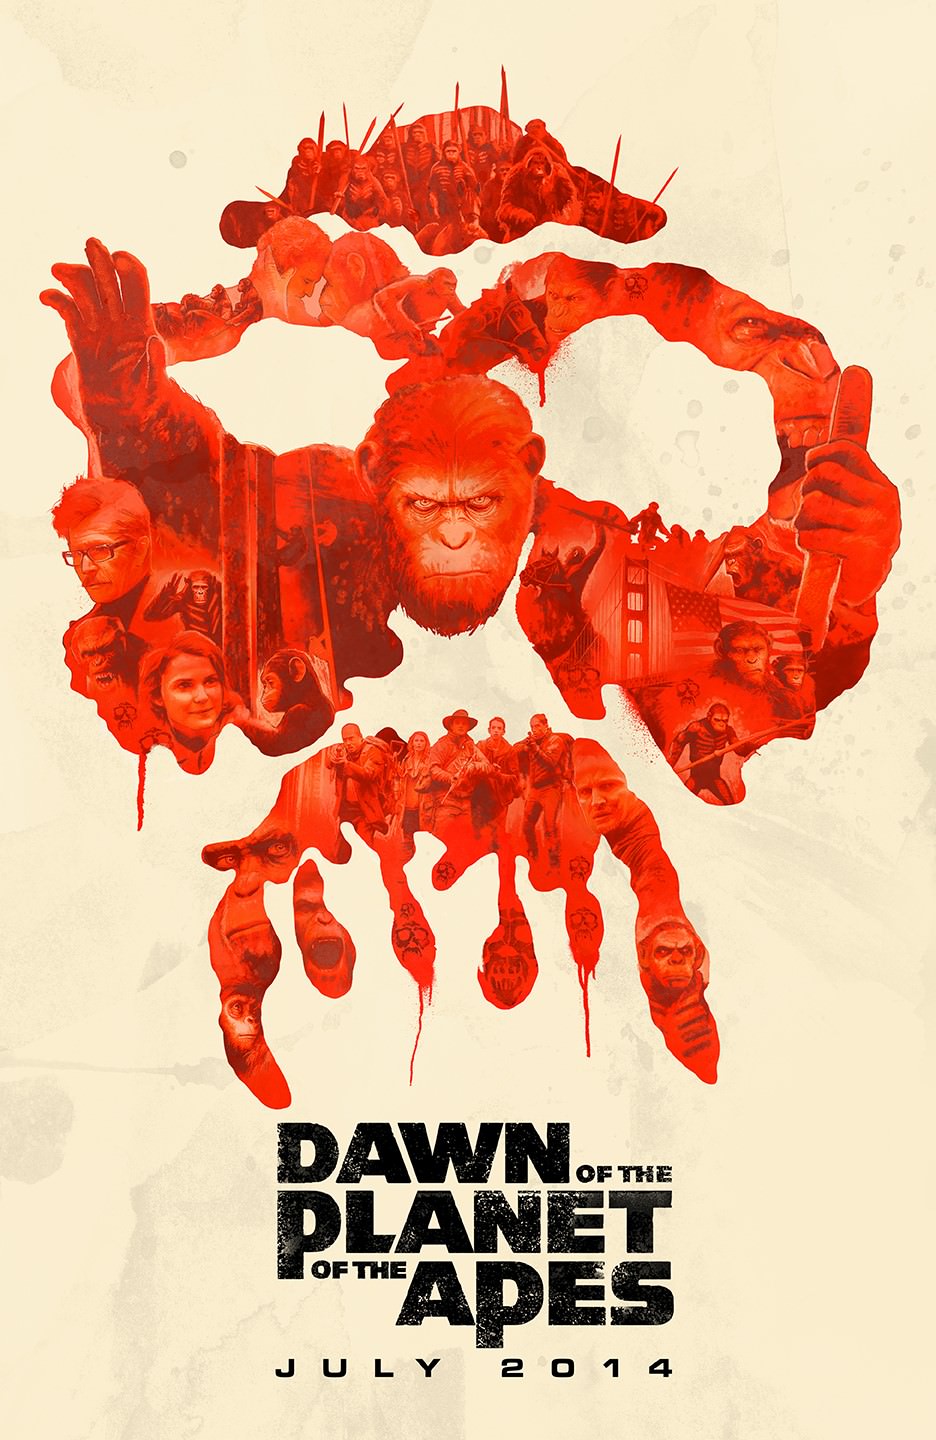 dawn-of-the-planet-of-the-apes-poster-janee-meadows